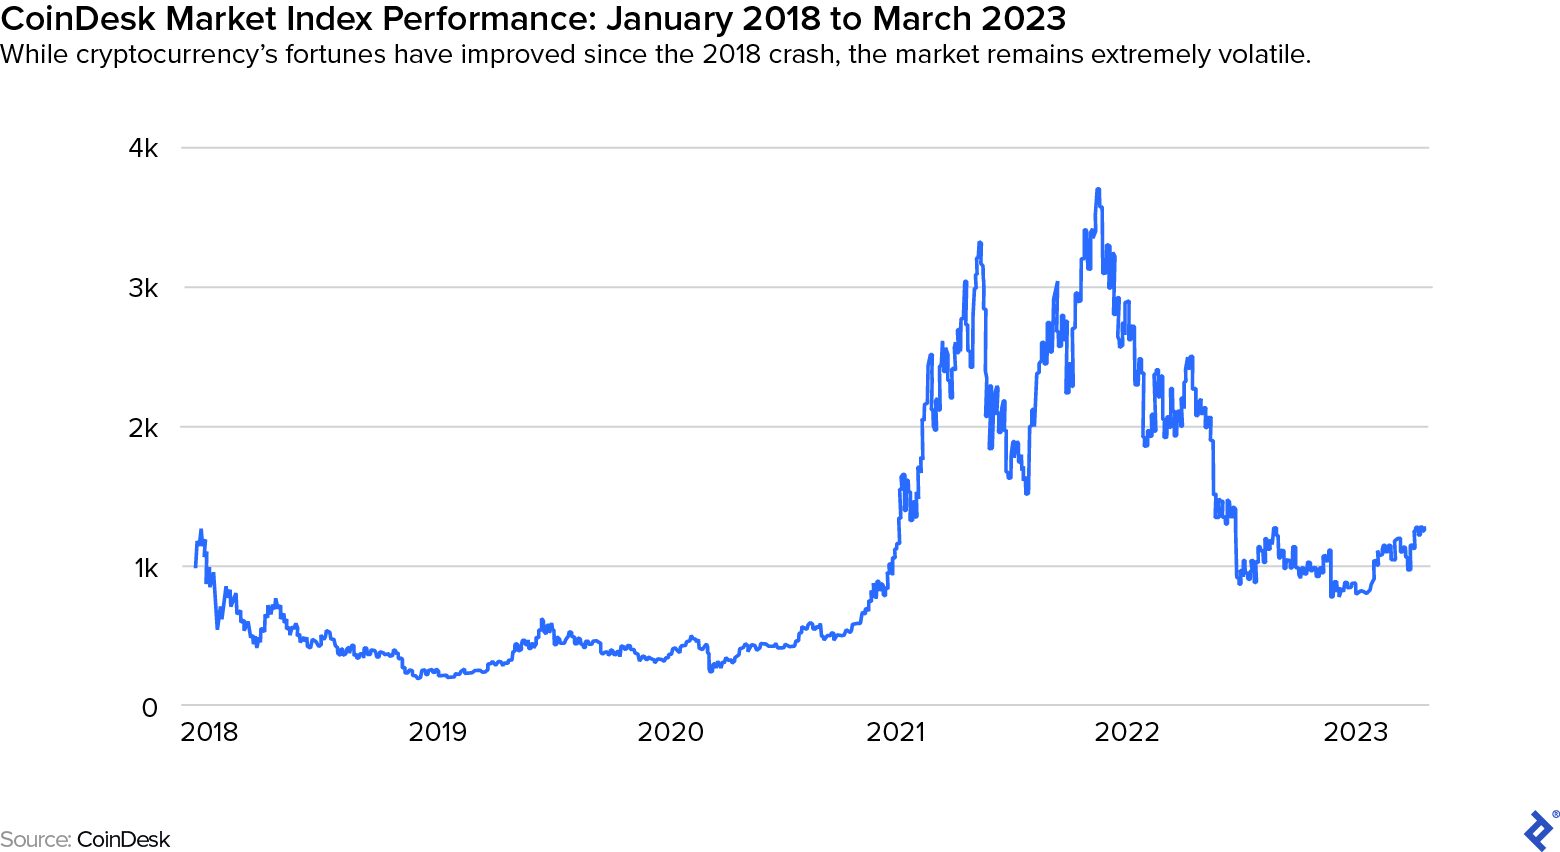 The CoinDesk Market Index performance from 2018 to 2023 dipped low in 2019, soared erratically in 2021 and 2022, and dropped to 2018 levels in 2023.